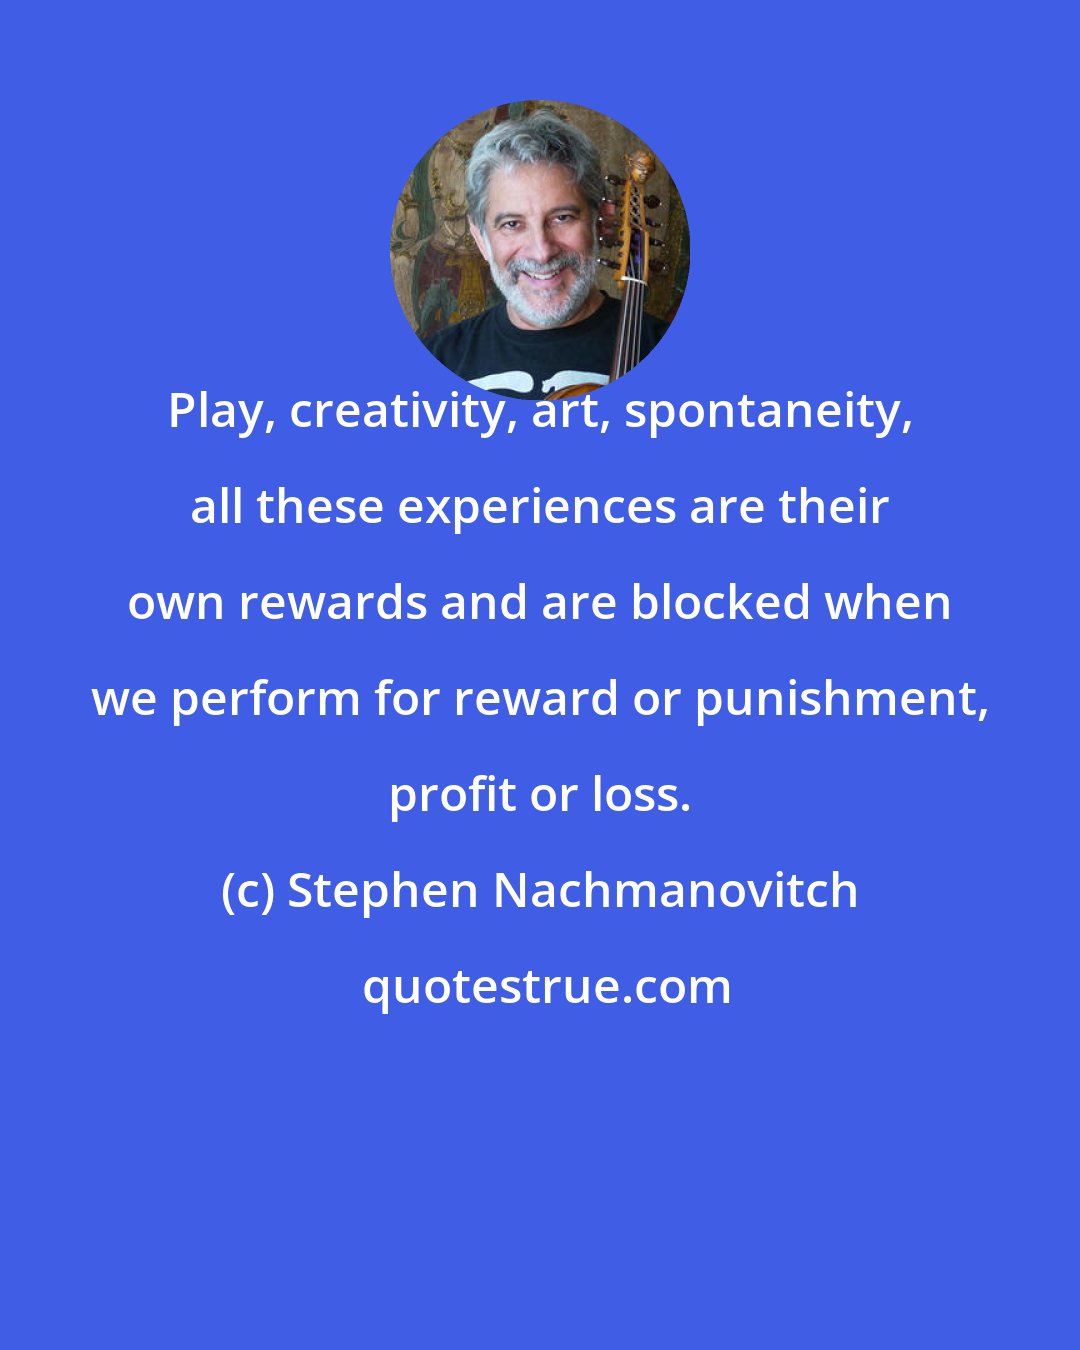 Stephen Nachmanovitch: Play, creativity, art, spontaneity, all these experiences are their own rewards and are blocked when we perform for reward or punishment, profit or loss.